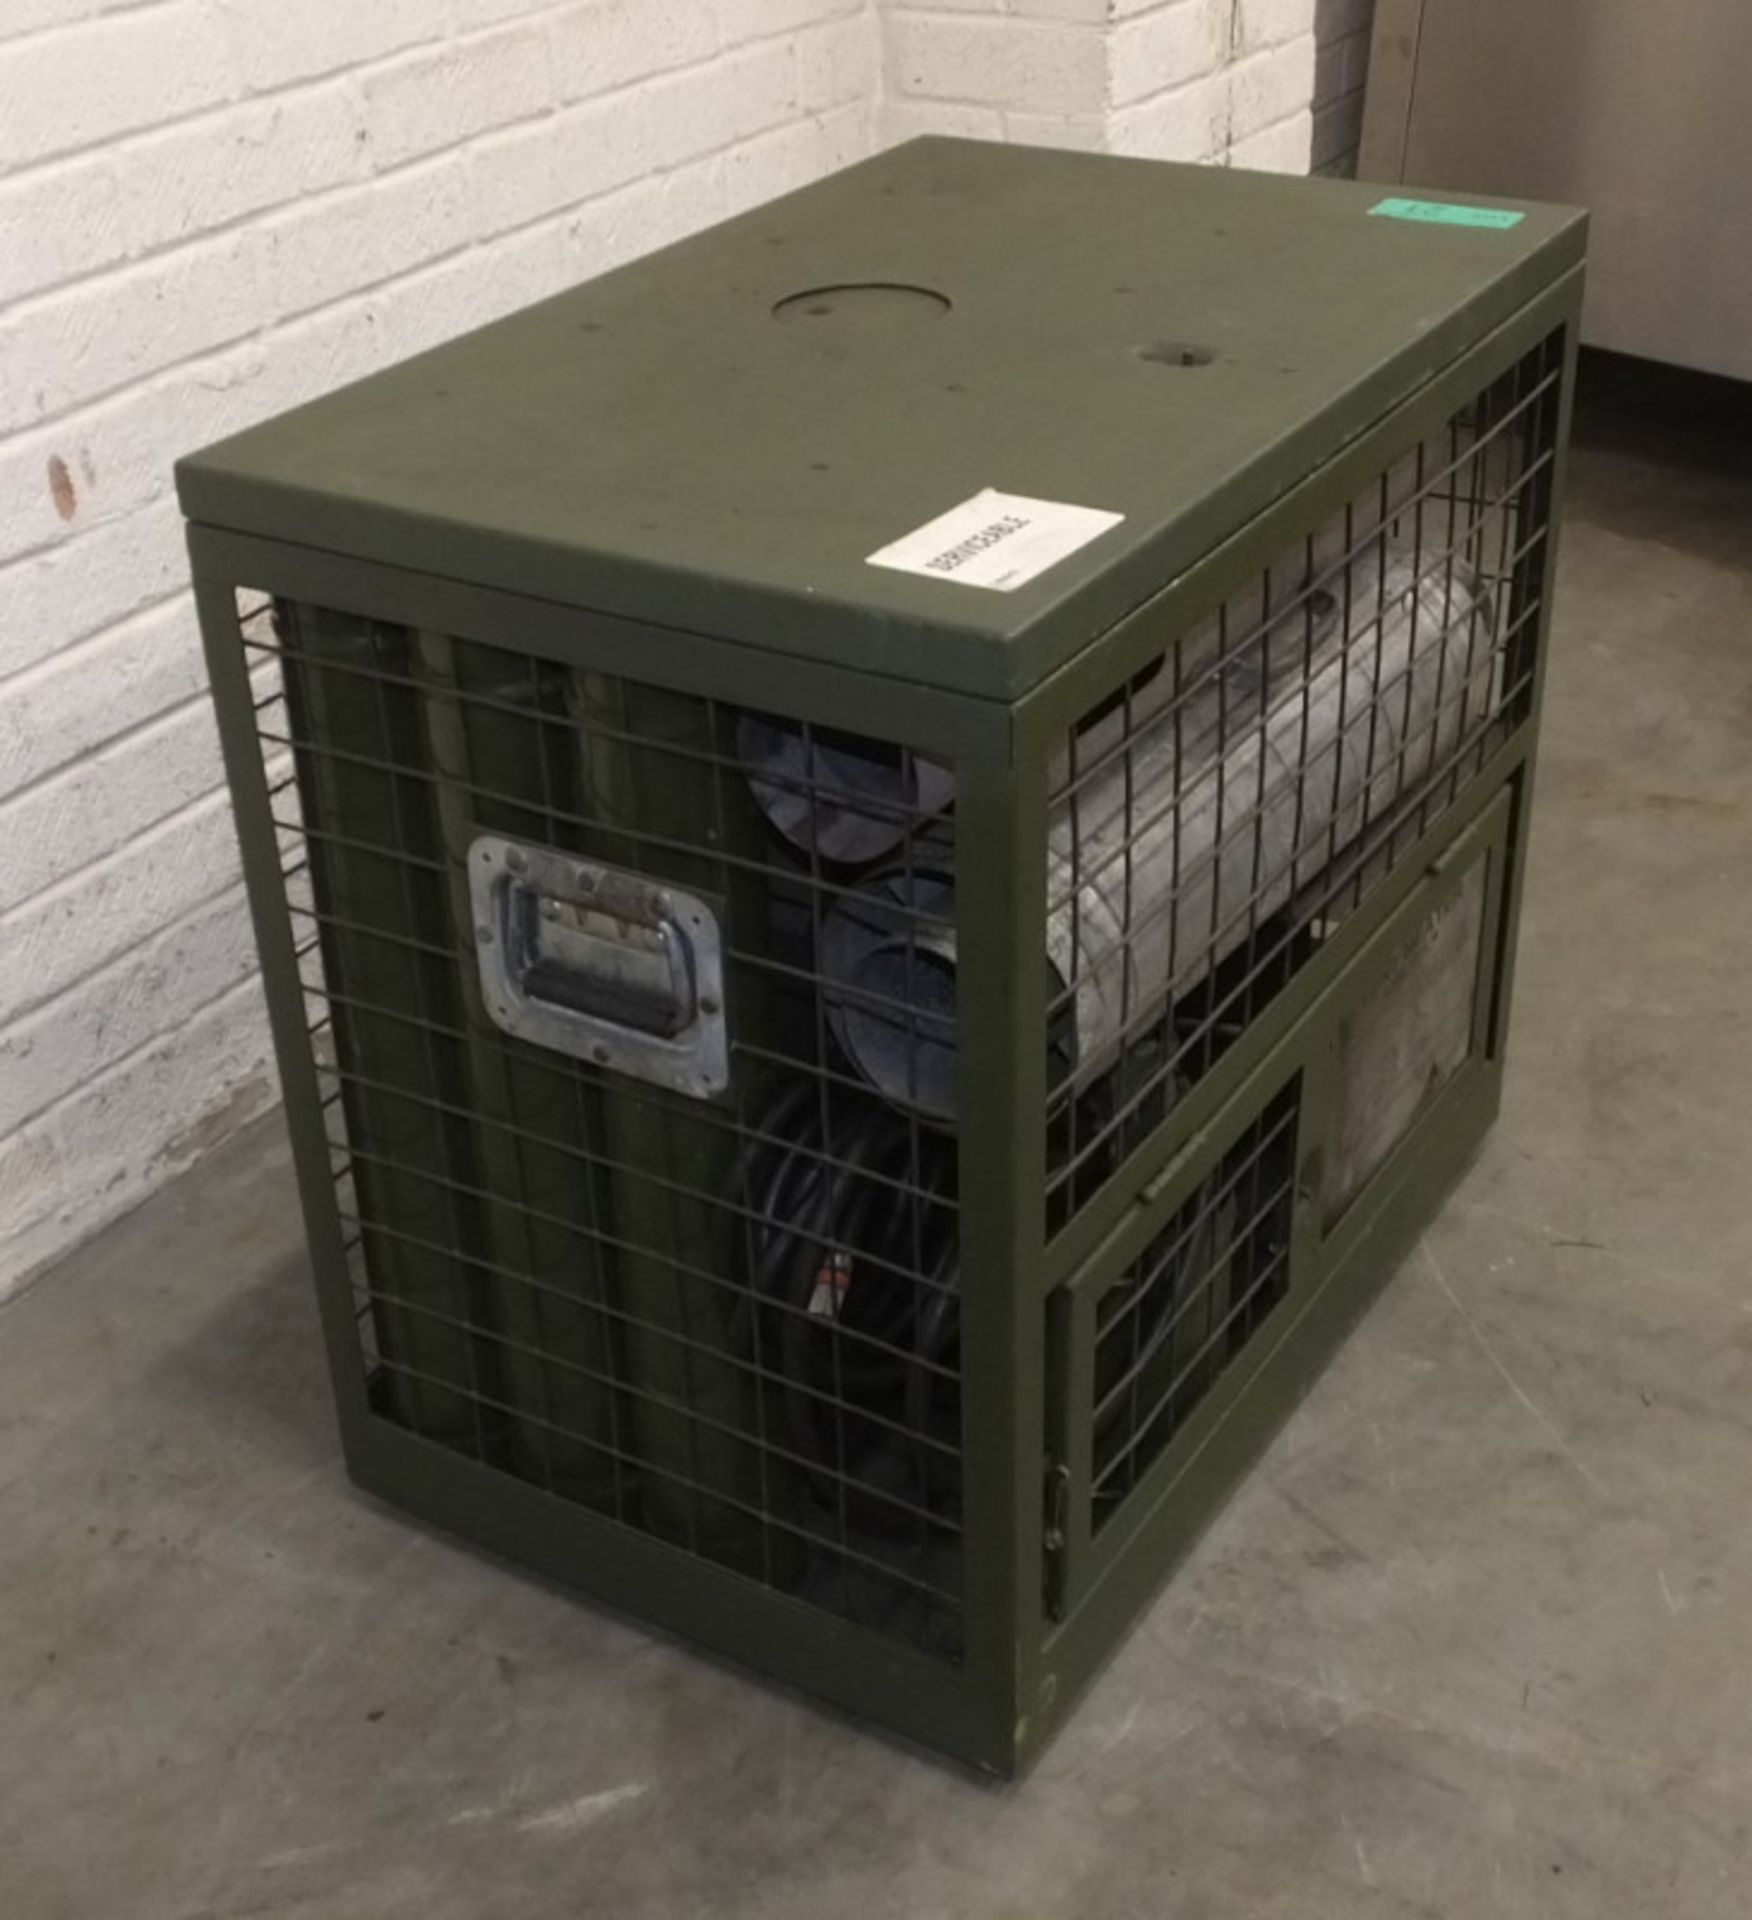 HotBox Heaters Tent Heater GHS III - NSN 4520-99-130-6045 Output - 5-15kW, Ex-MOD specific - Image 10 of 11